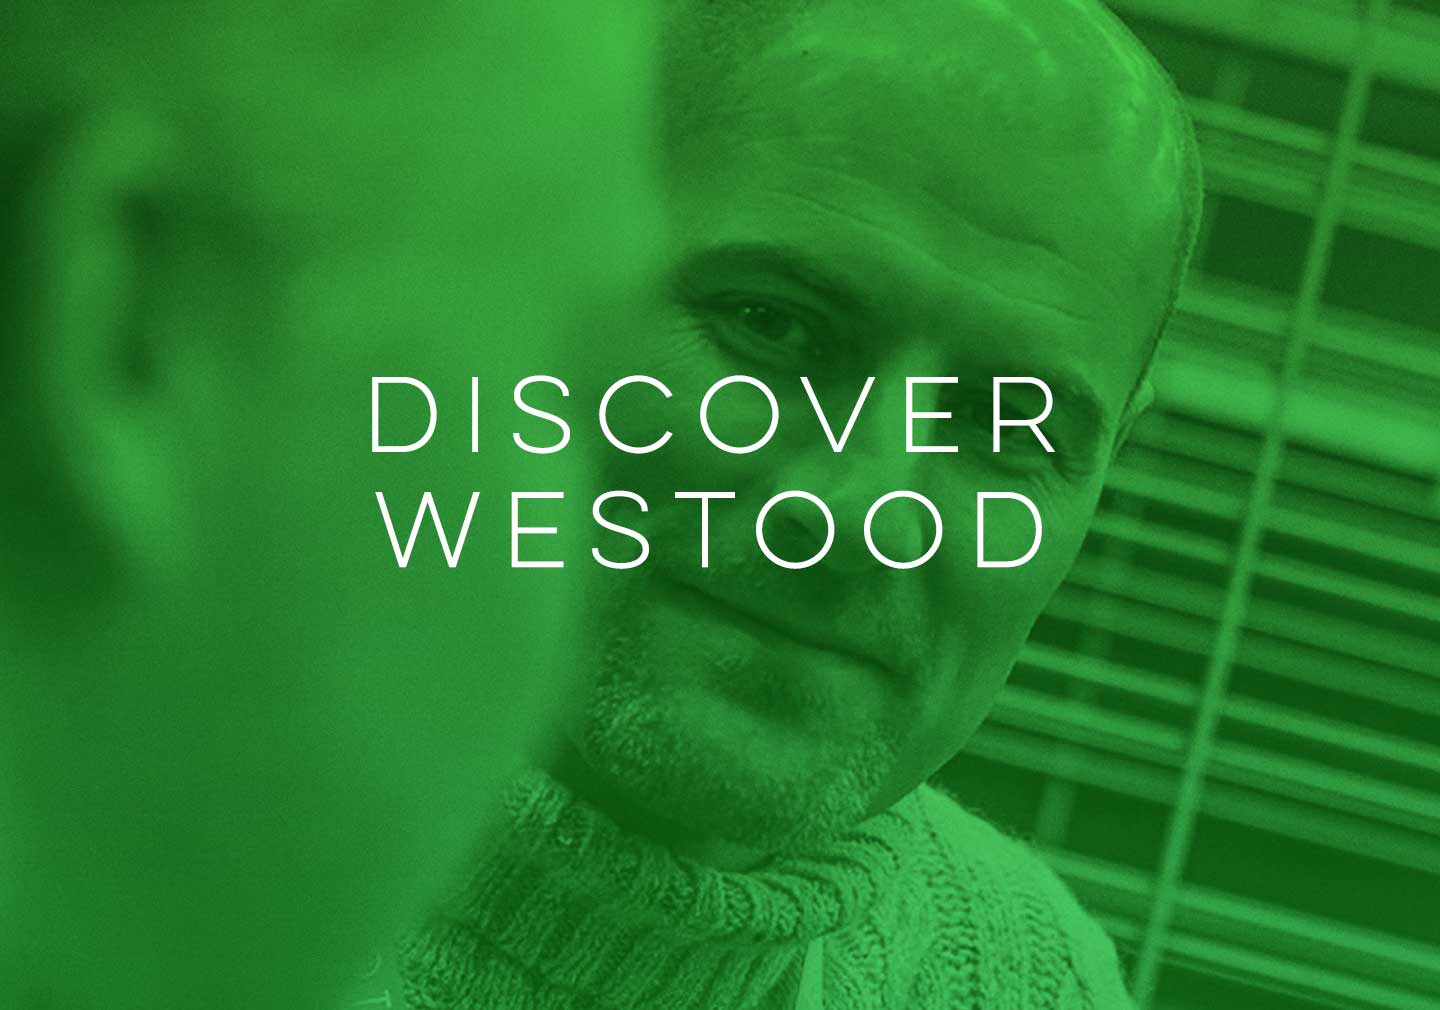 Discover more about Westwood